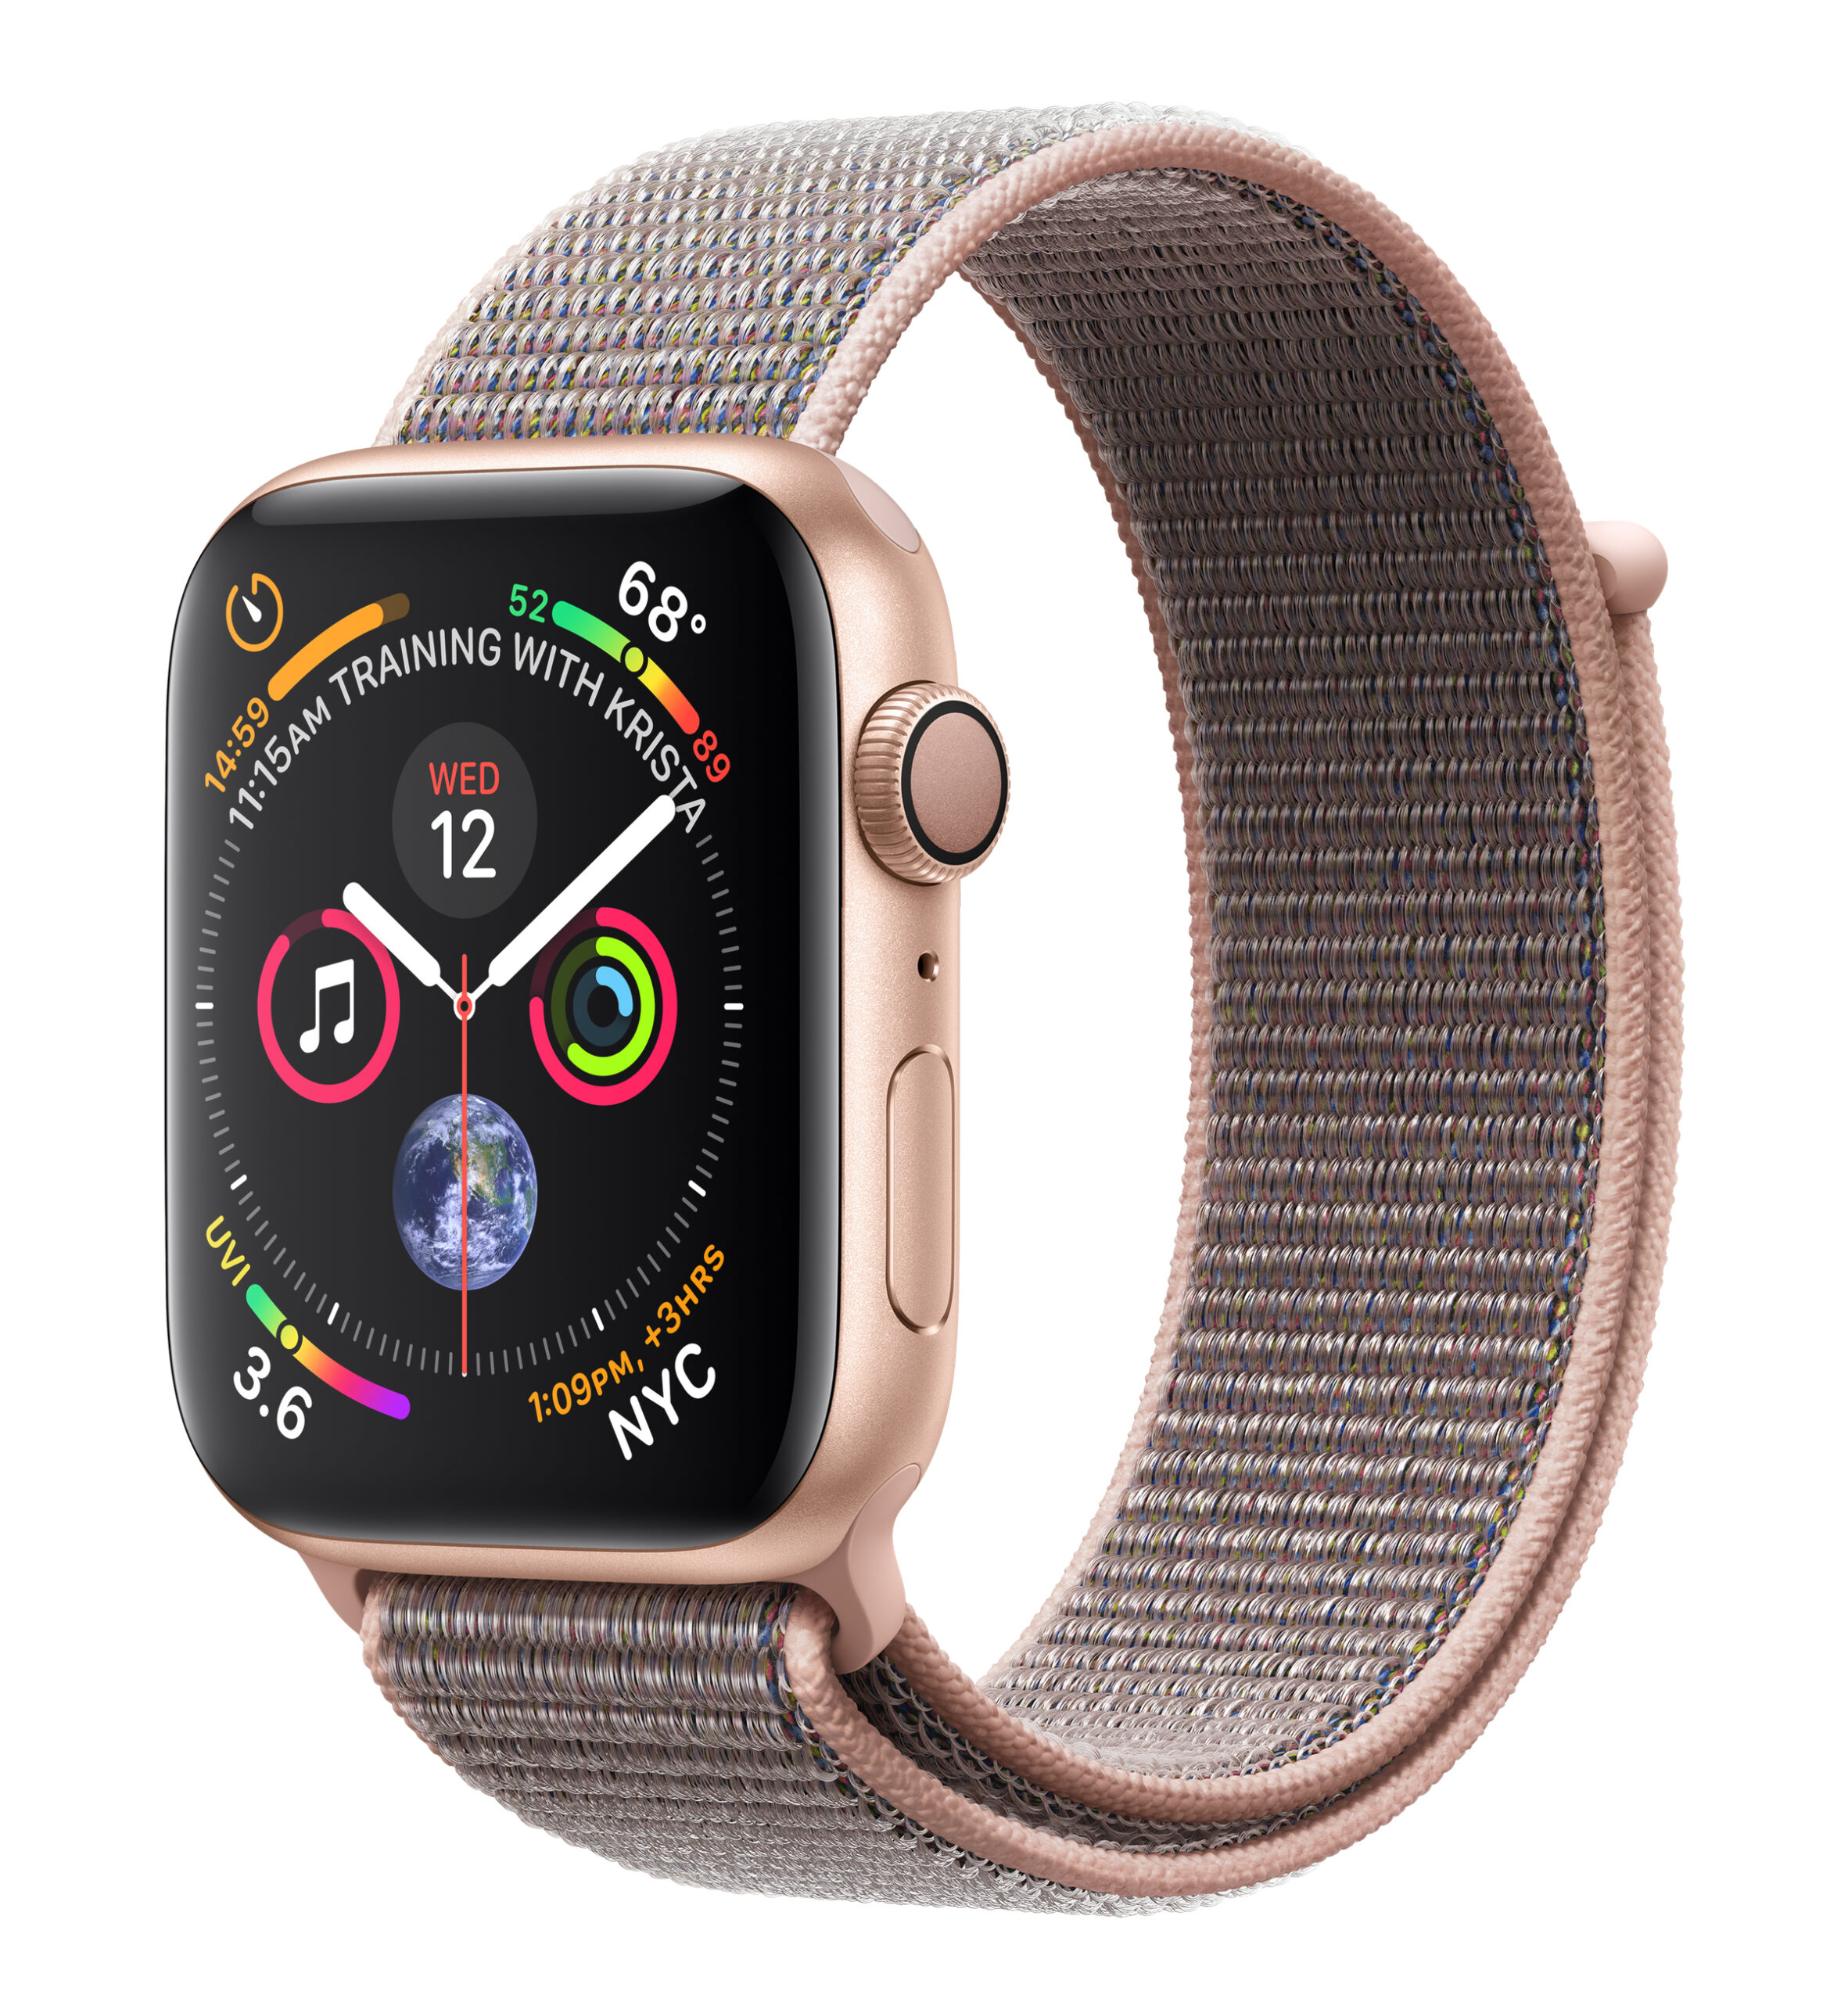 MU6G2LL/A - $266 - Apple Watch Series 4 GPS 44mm Gold Aluminum Case with Pink Sand Sport Loop